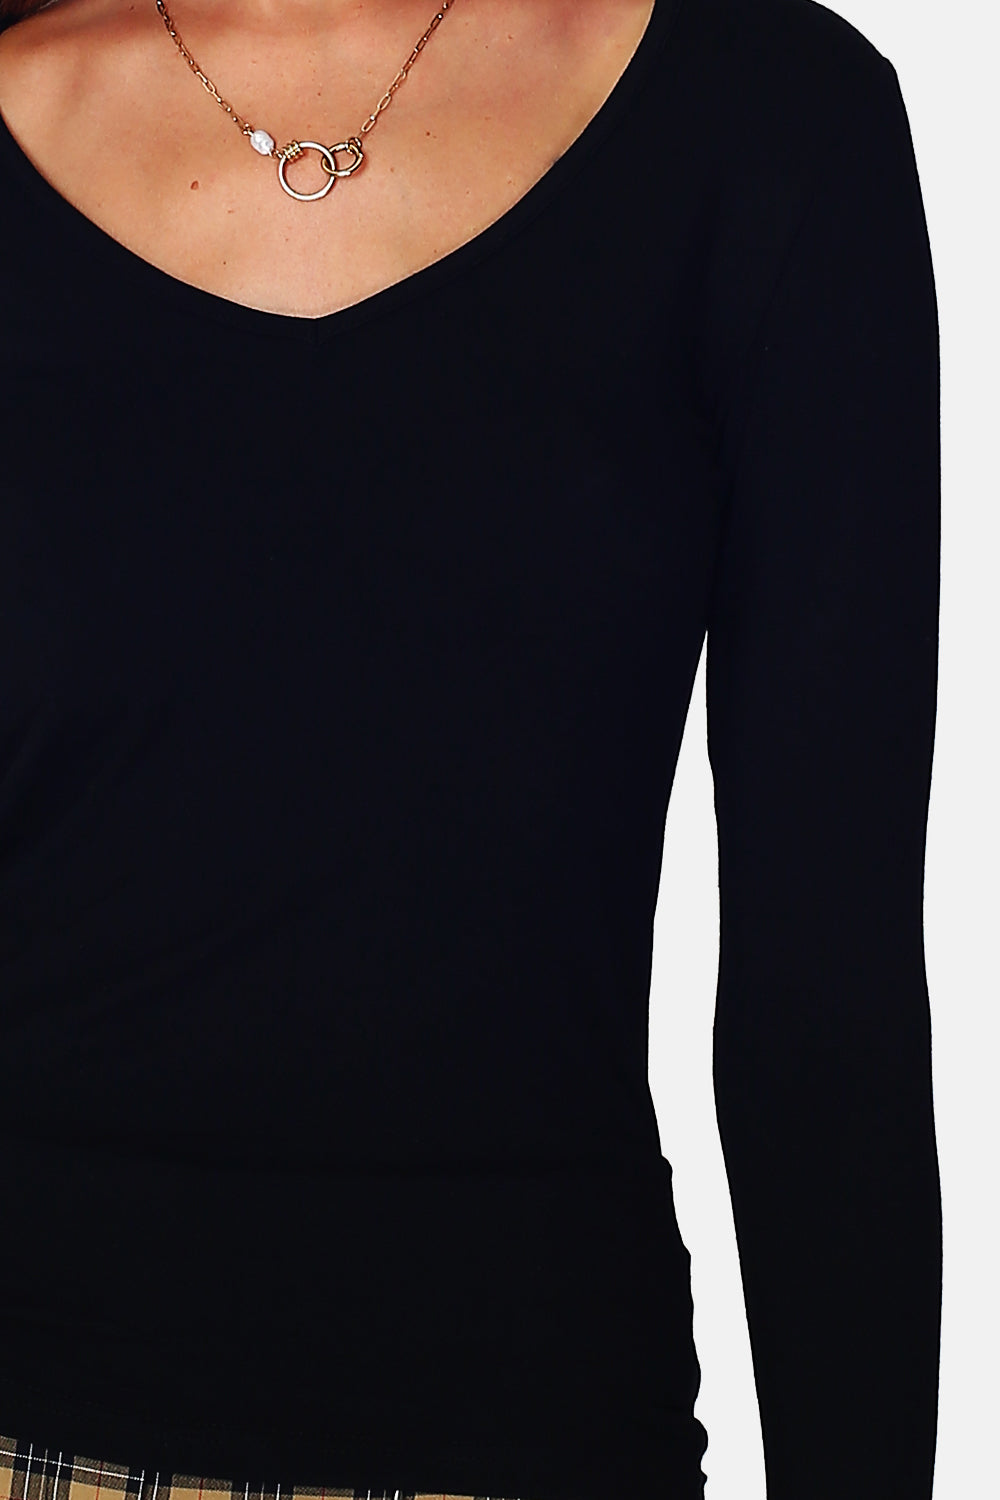 V-neck under sweater with long sleeves